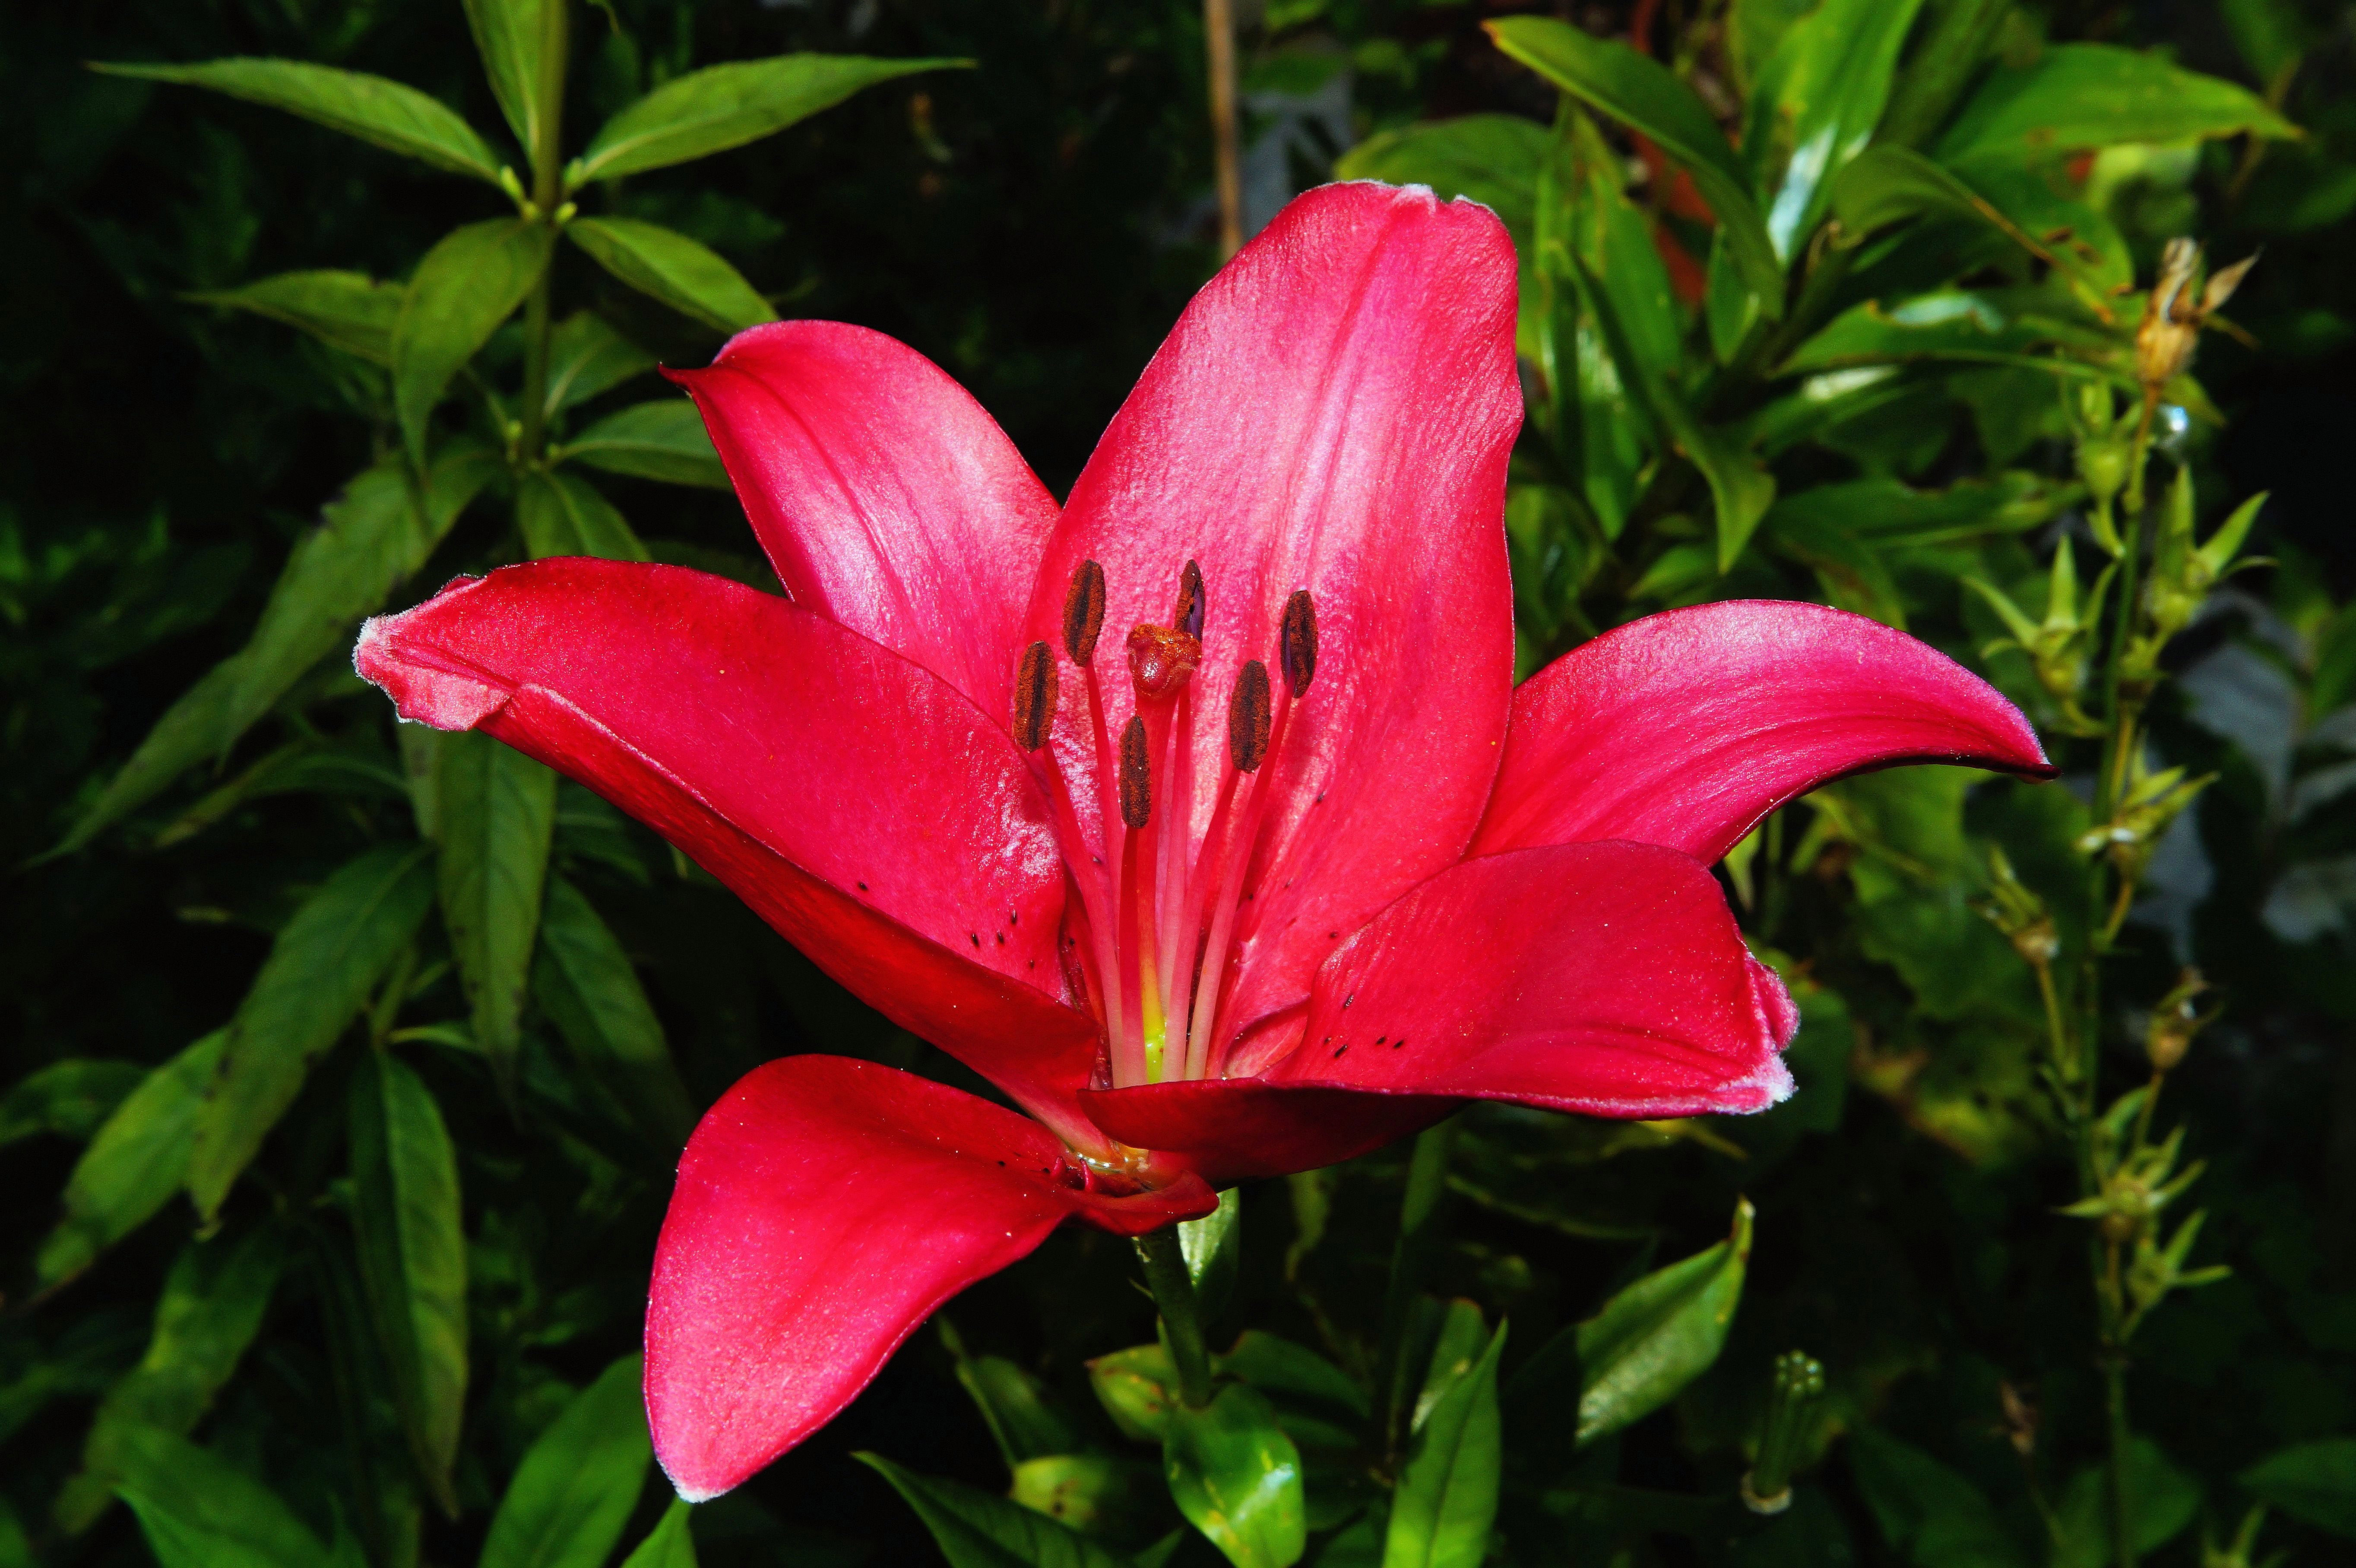 the pink lily